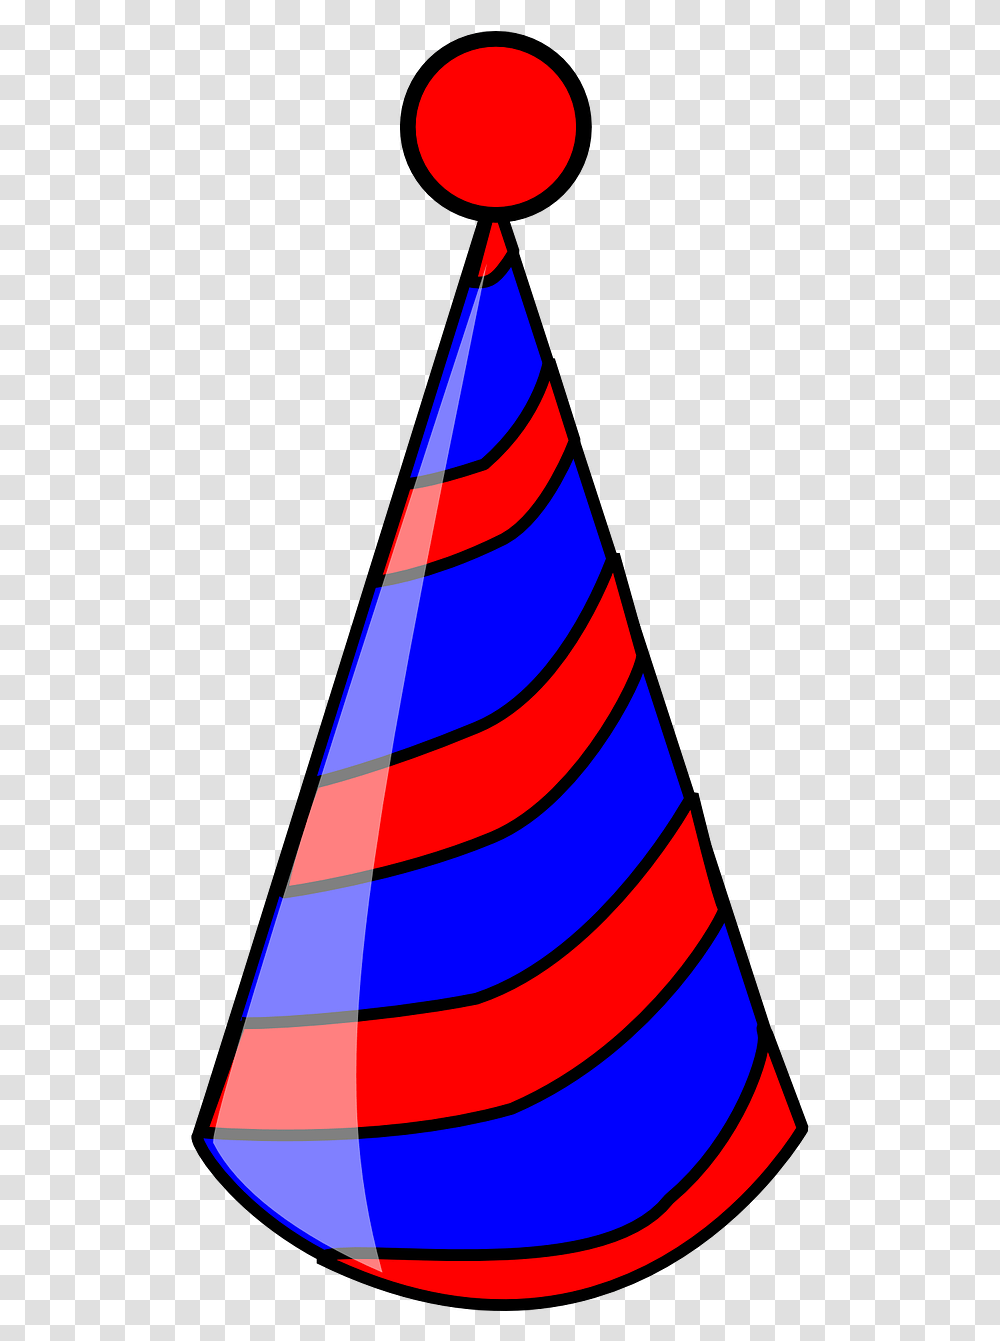 Hat Birthday Party Celebration Image Party Hat Clip Party Hat Clip Art, Clothing, Apparel Transparent Png